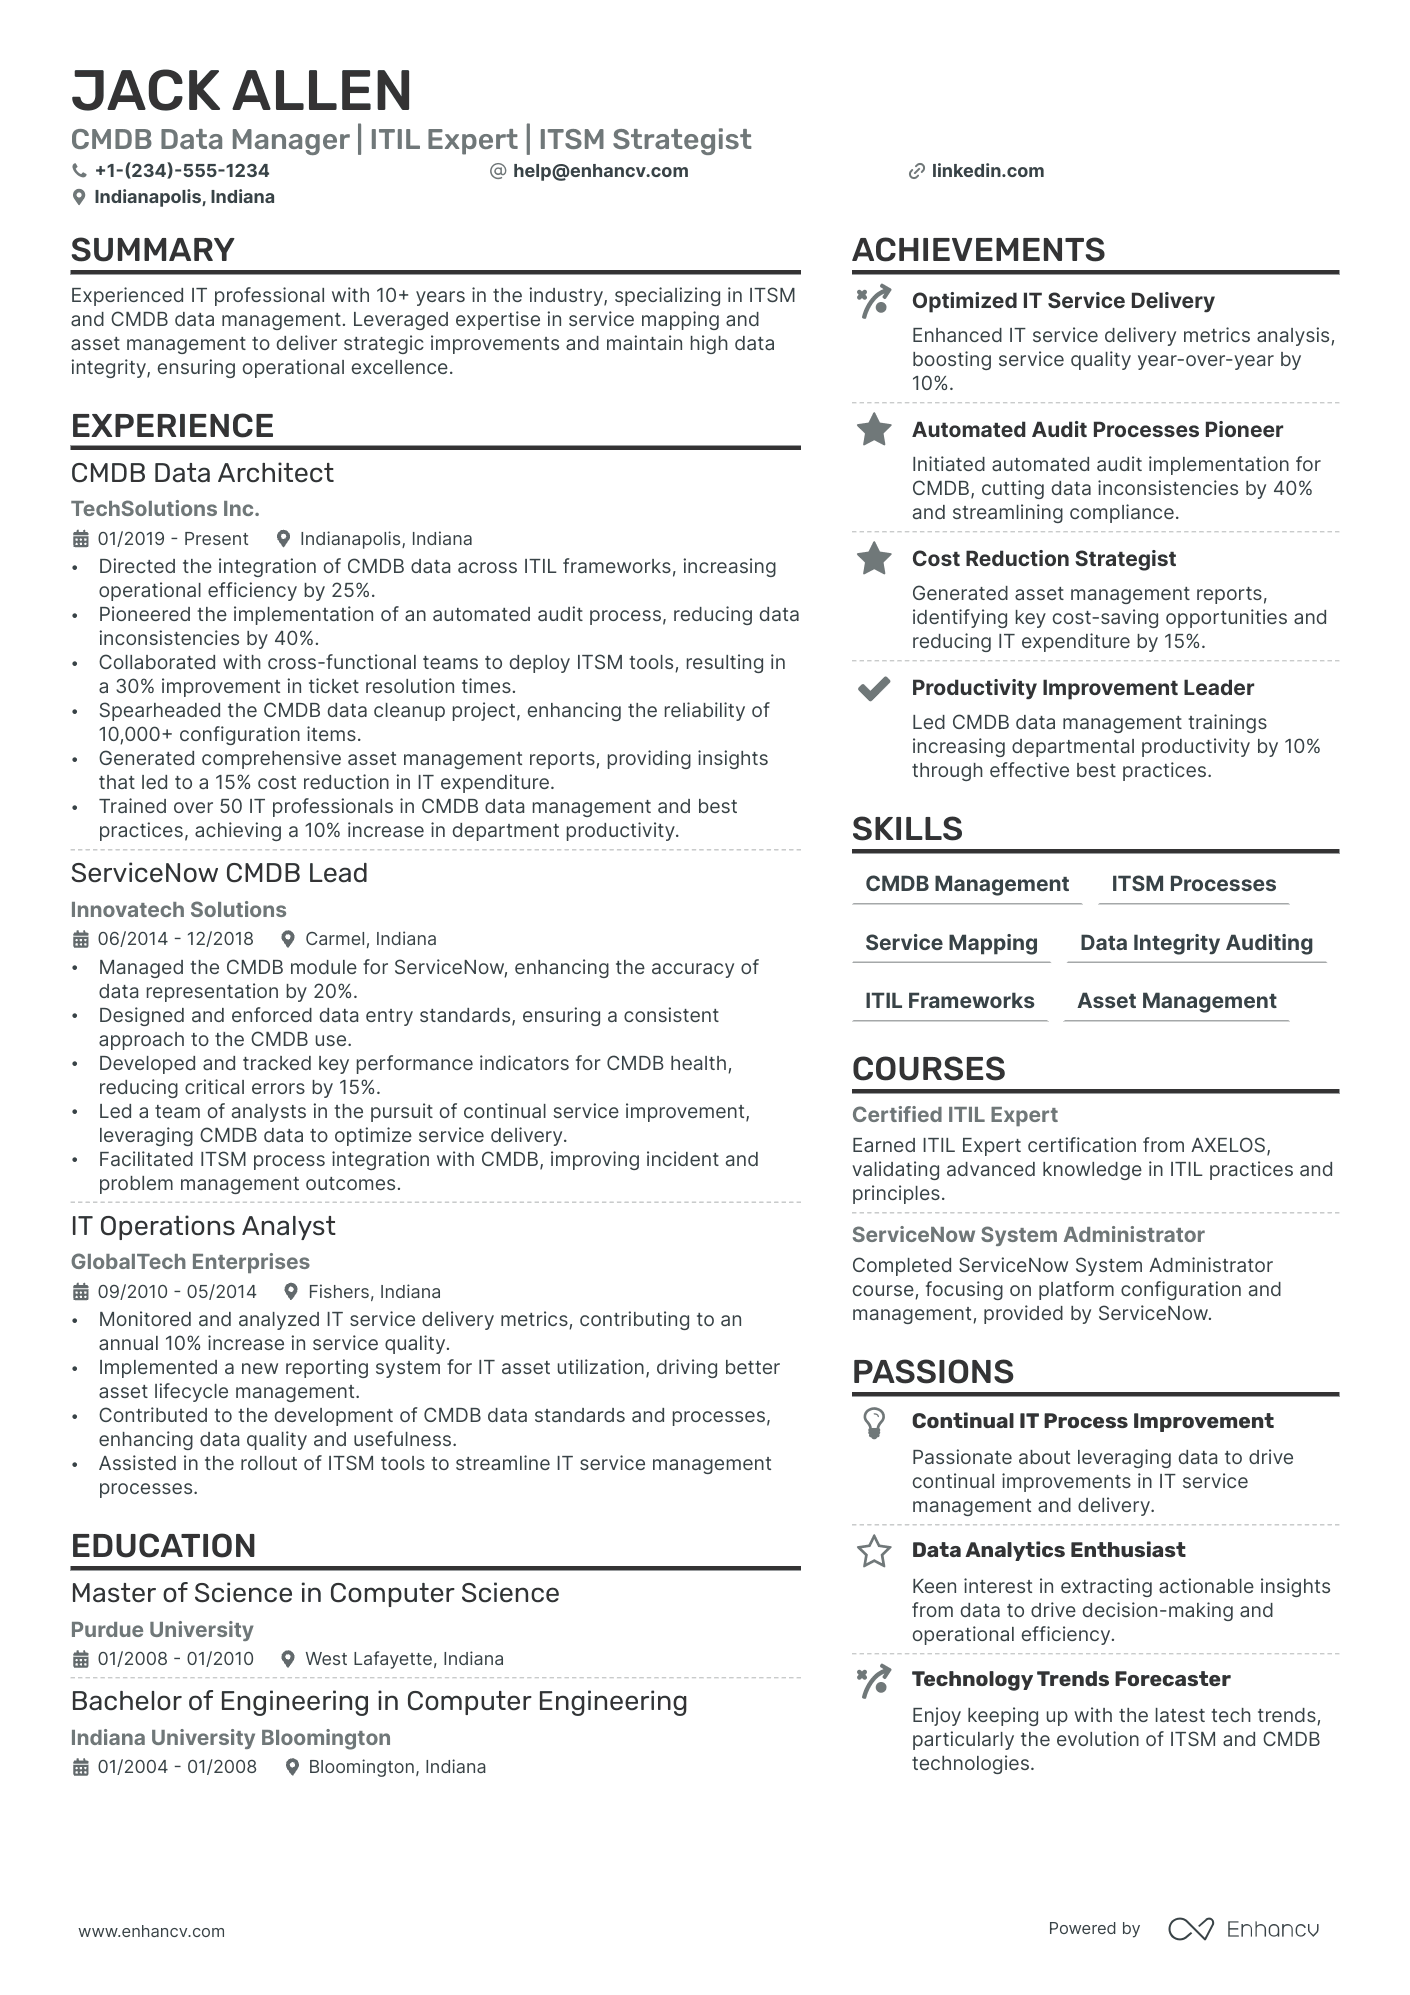 how to write a resume for business analyst position